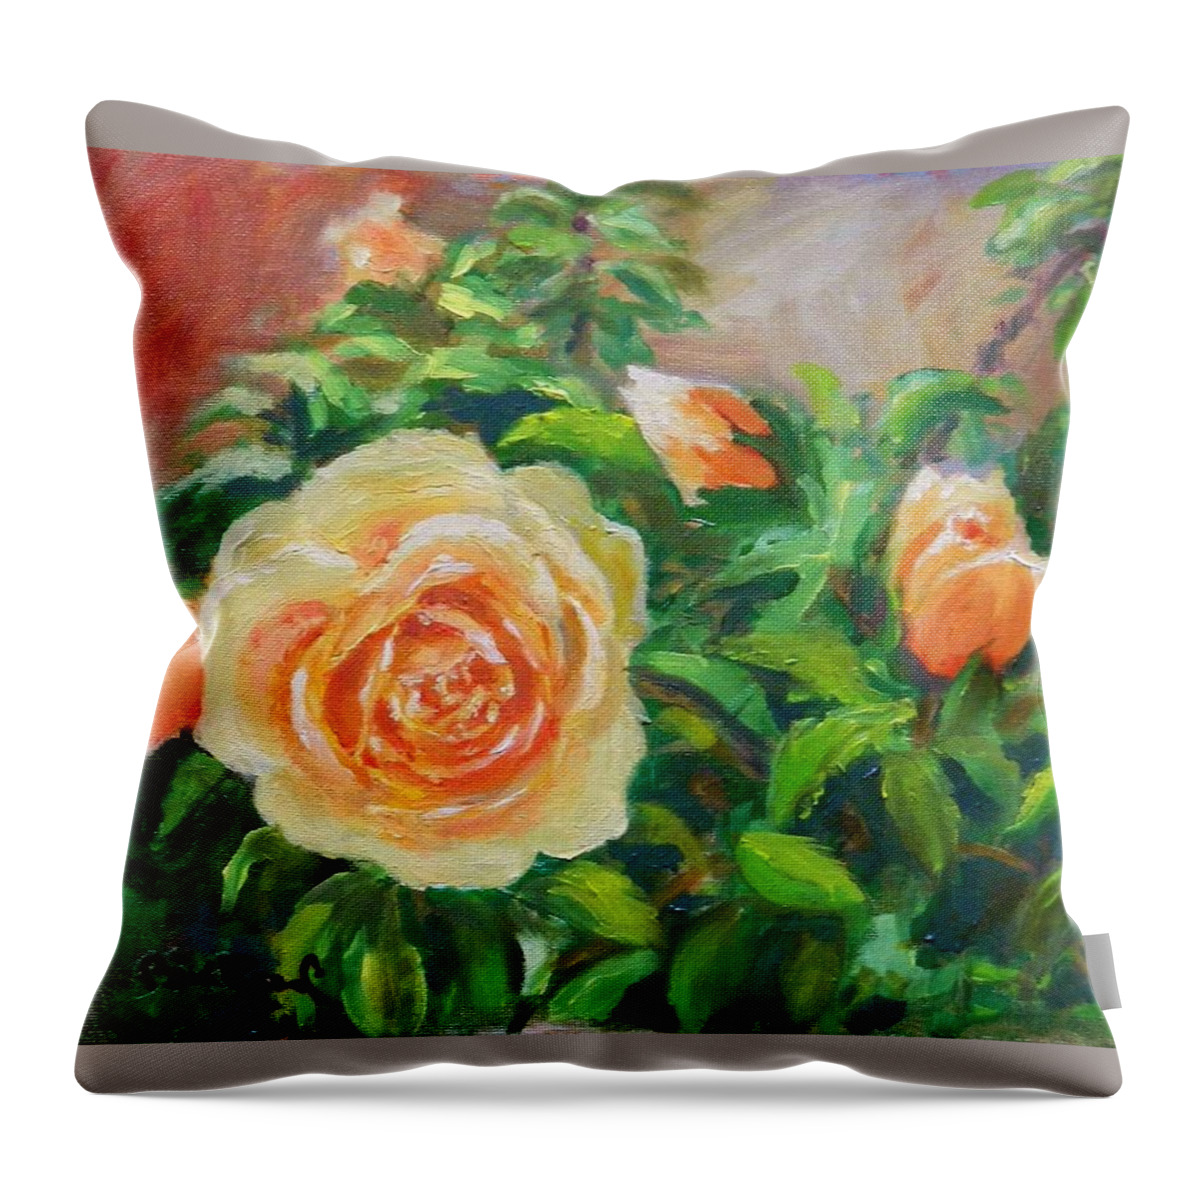 Roses Throw Pillow featuring the painting Yellow Roses by William Reed